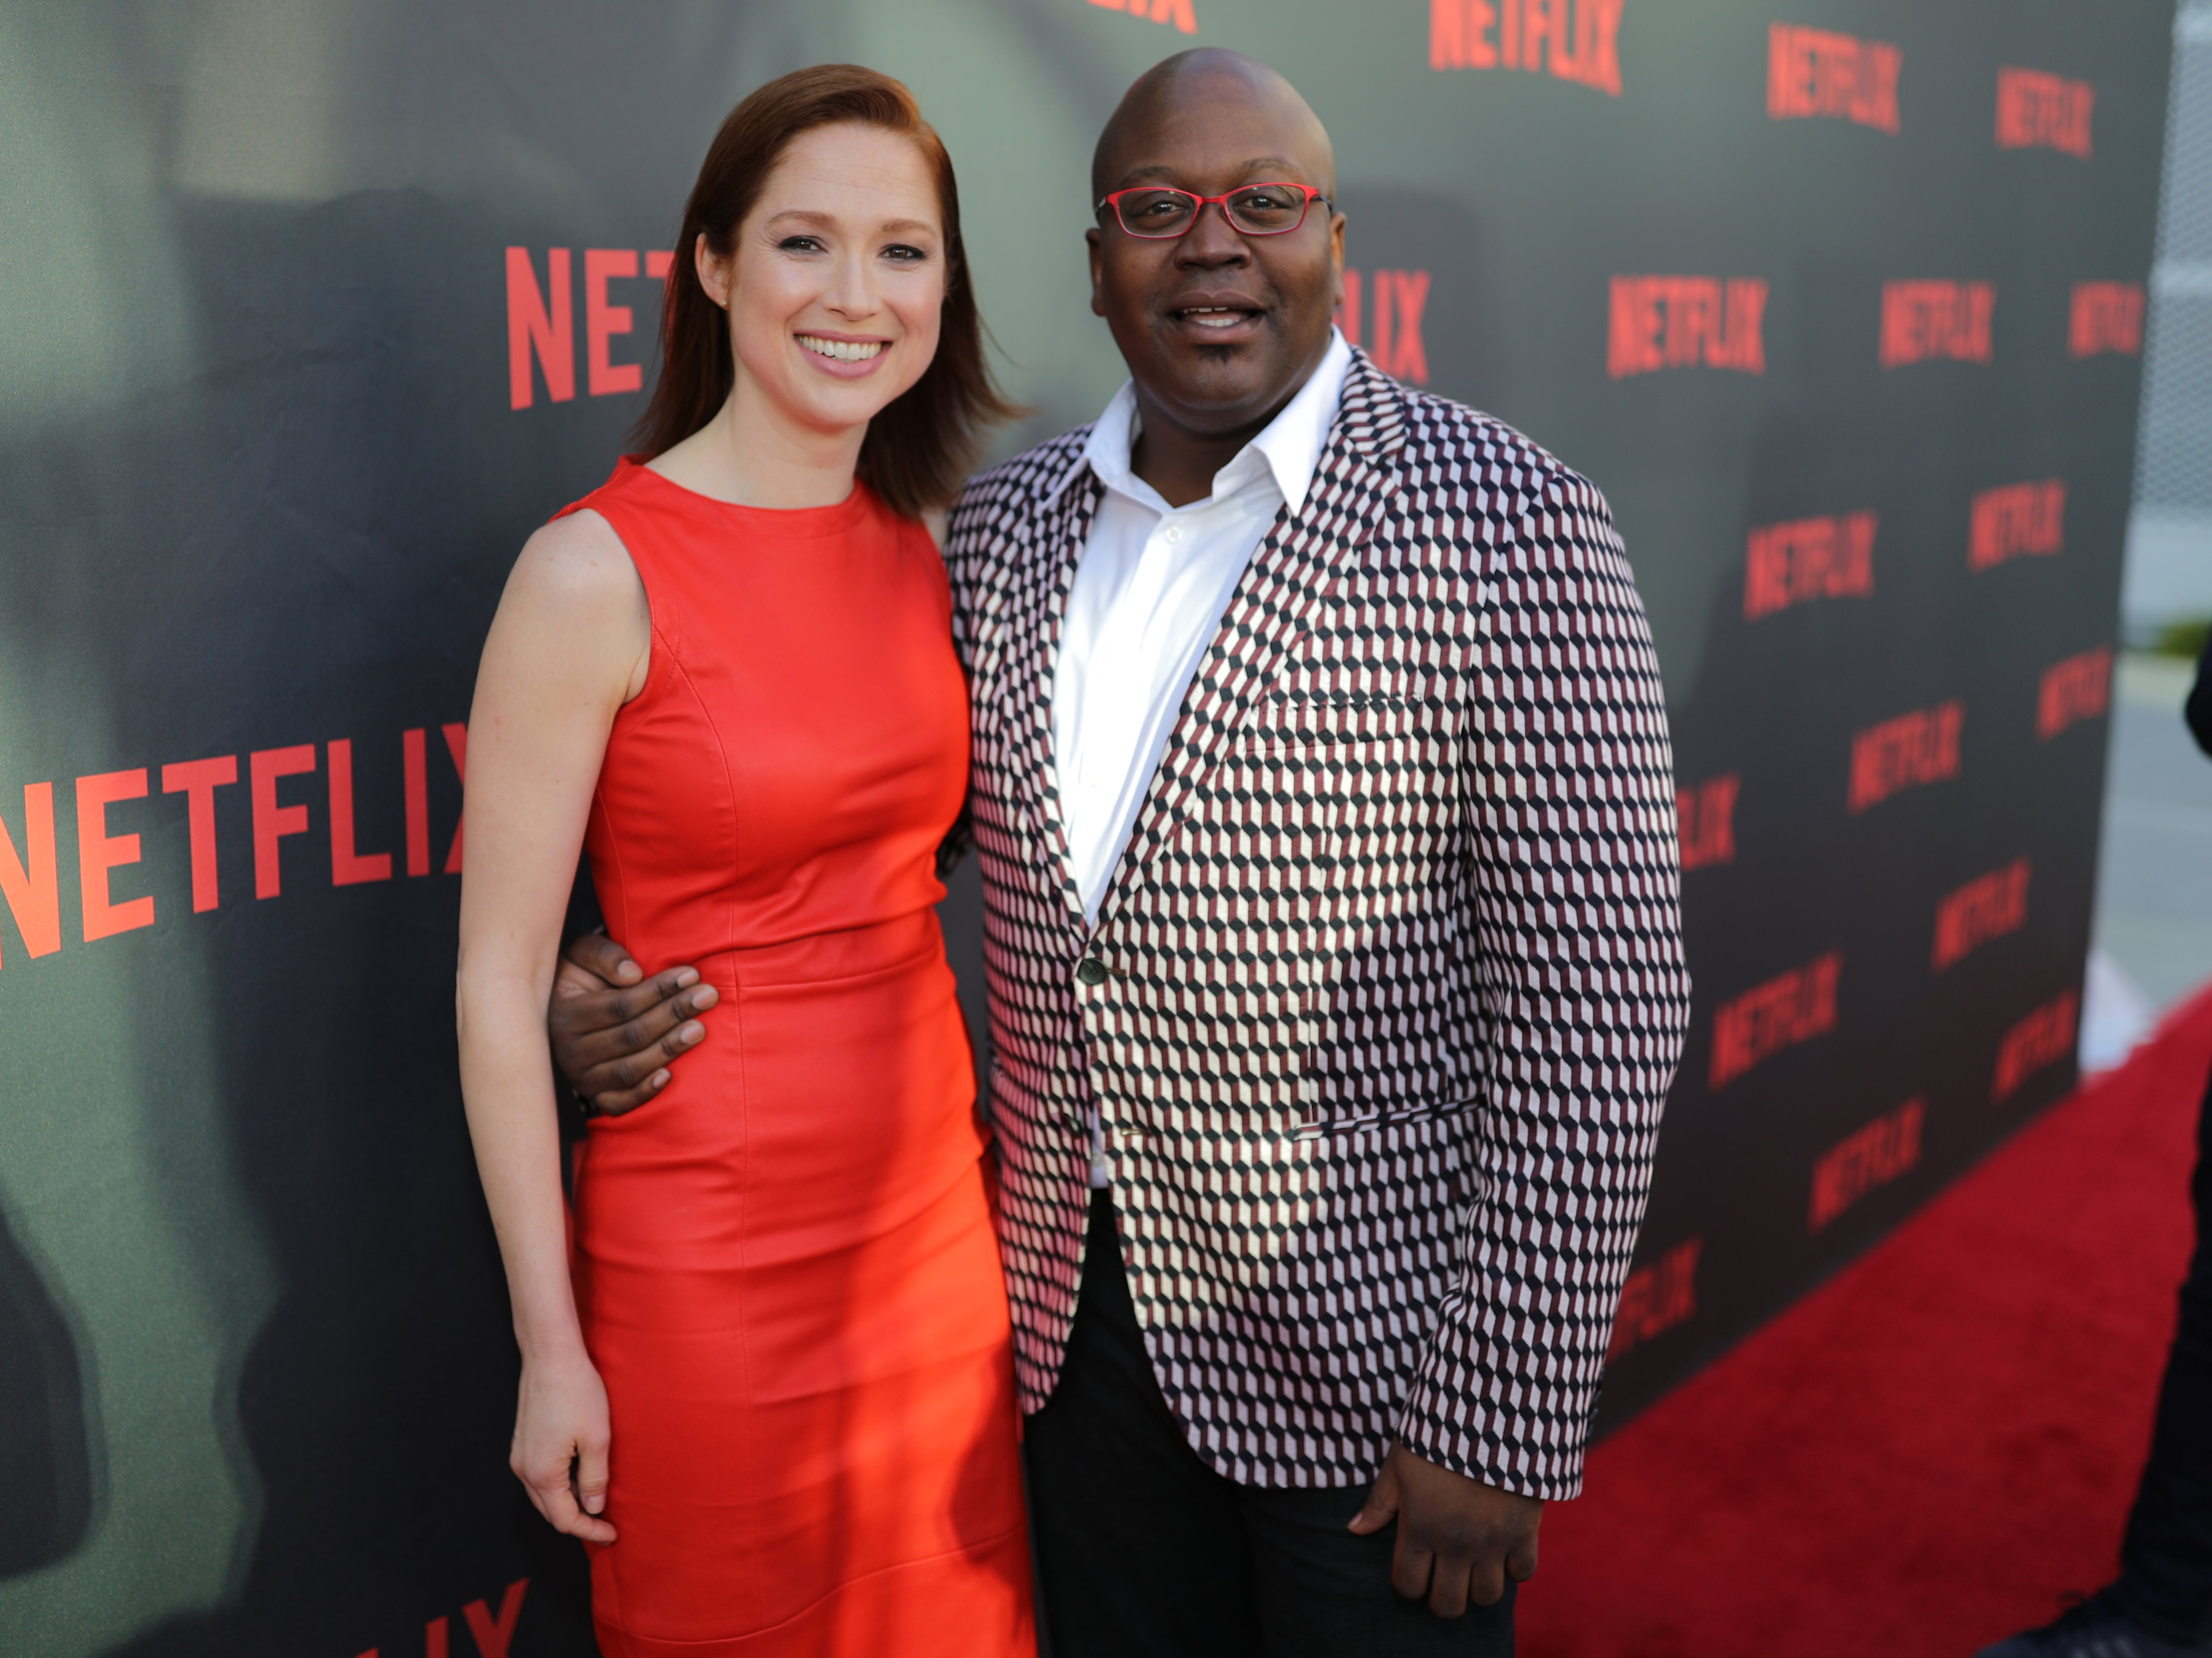 Ellie Kemper and Tituss Burgess at an ‘Unbreakable Kimmy Schmidt’ event on 4 May 2017 in North Hollywood, California